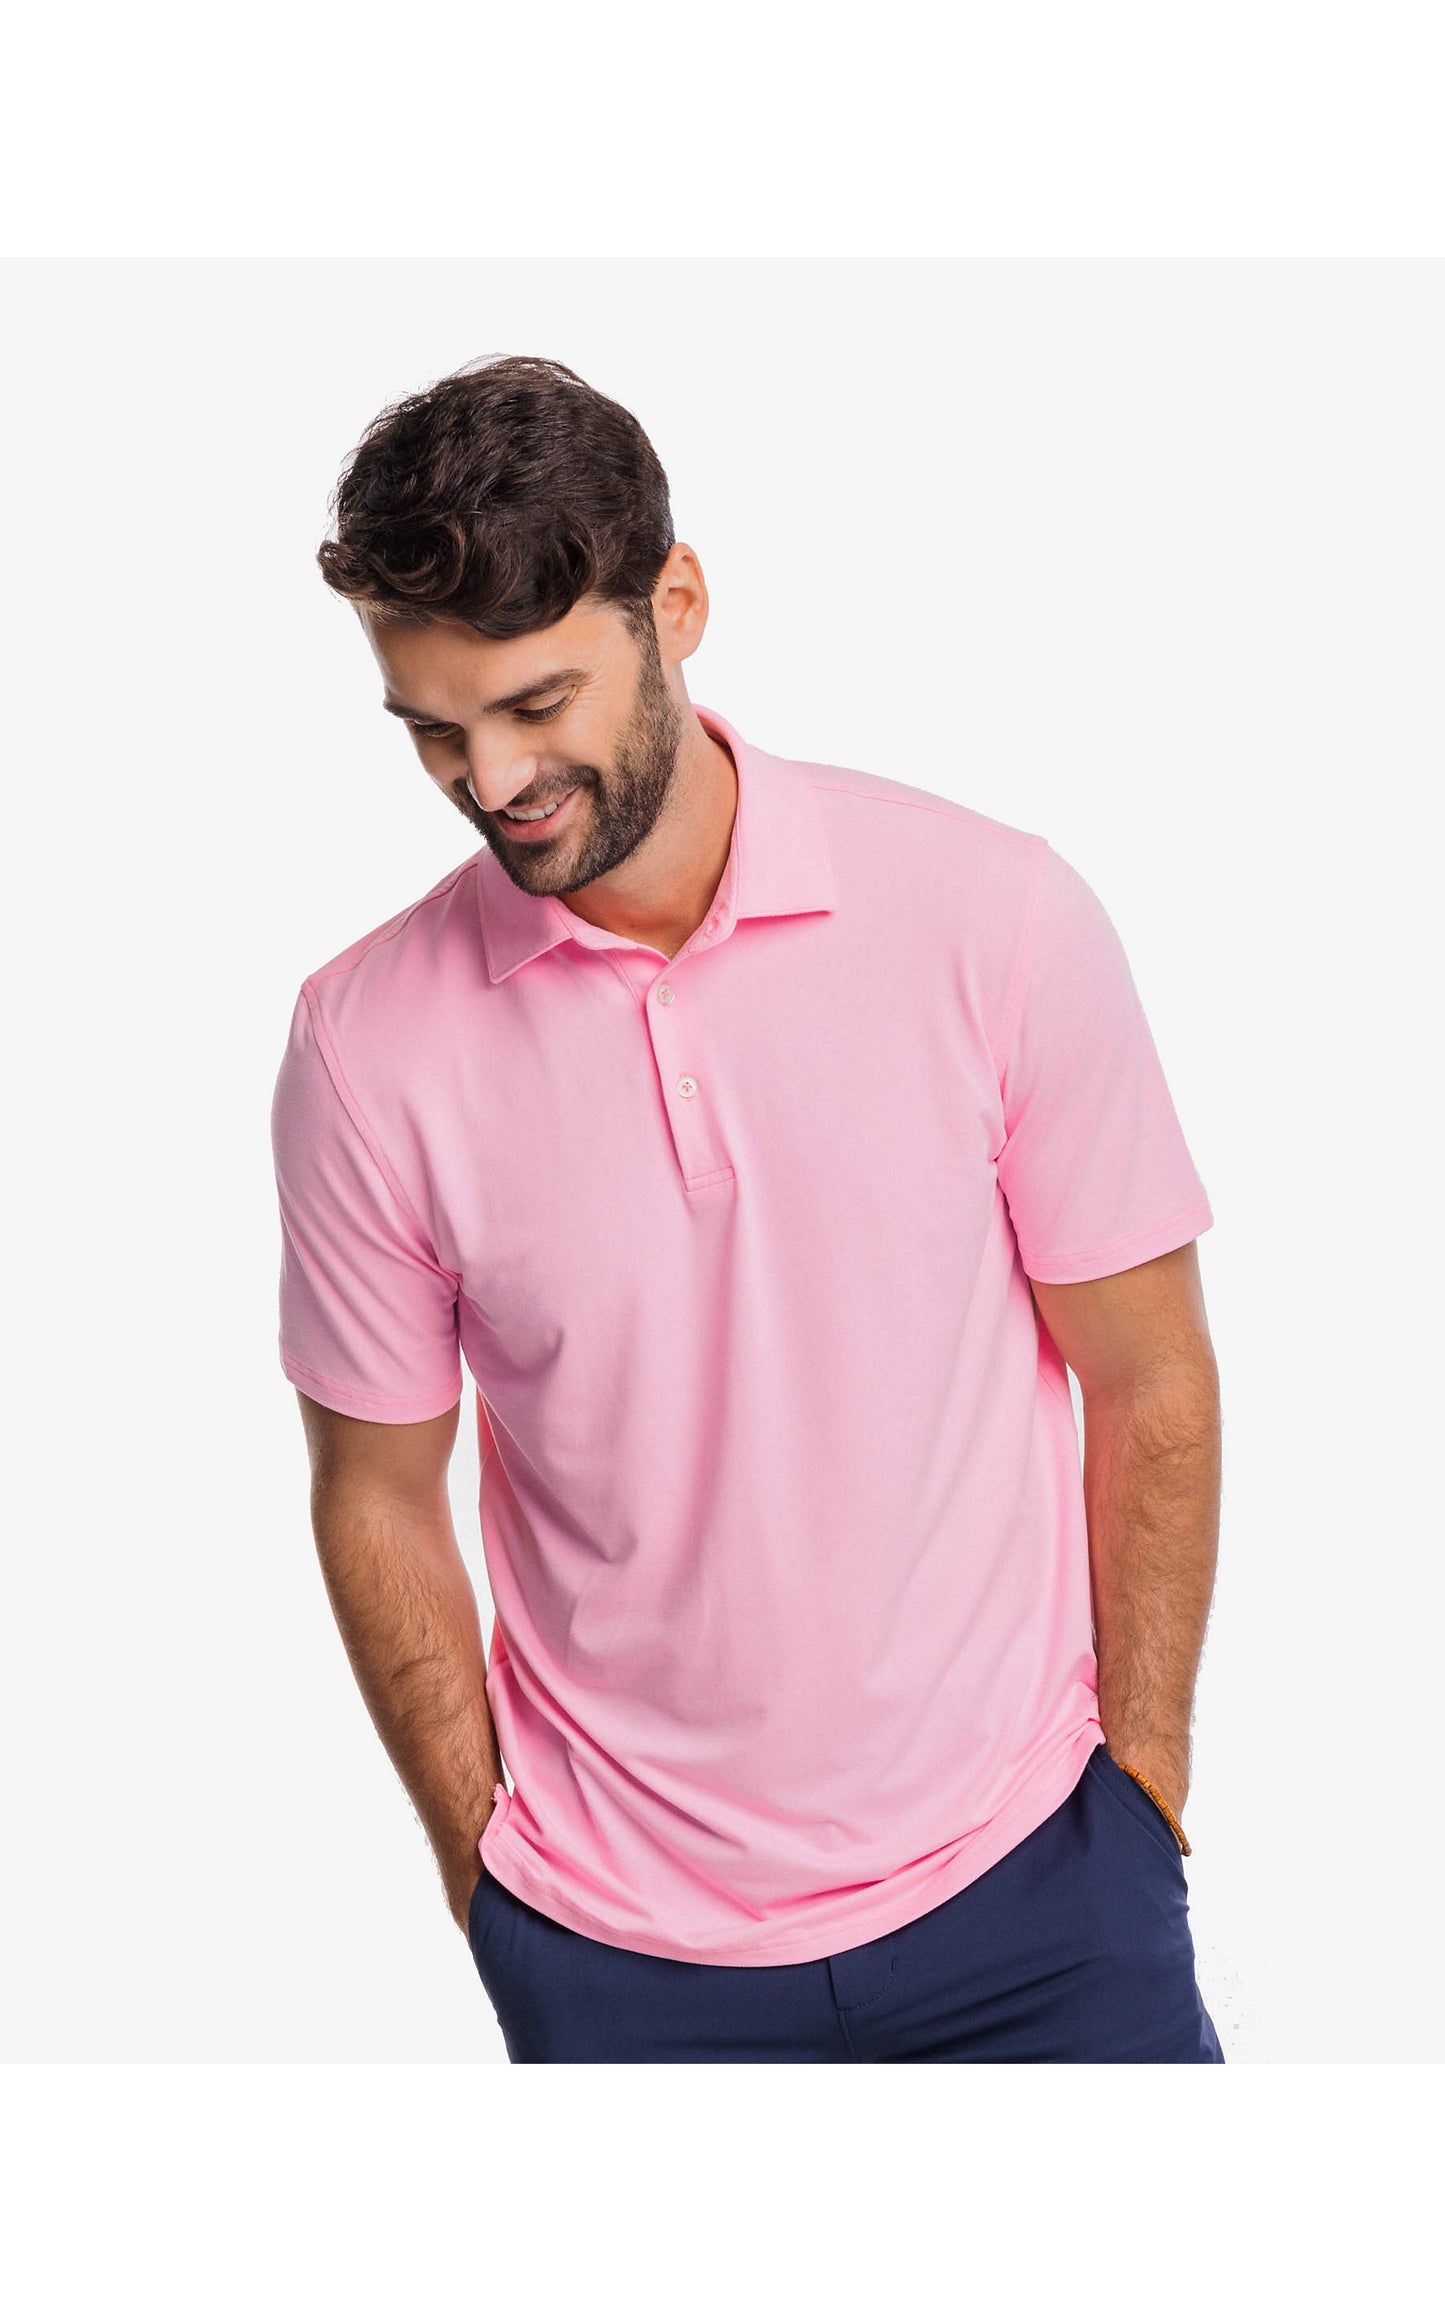 Lilly Pulitzer x Southern Tide: Men's Short Sleeve Ryder Performance Polo in Mandevilla Baby